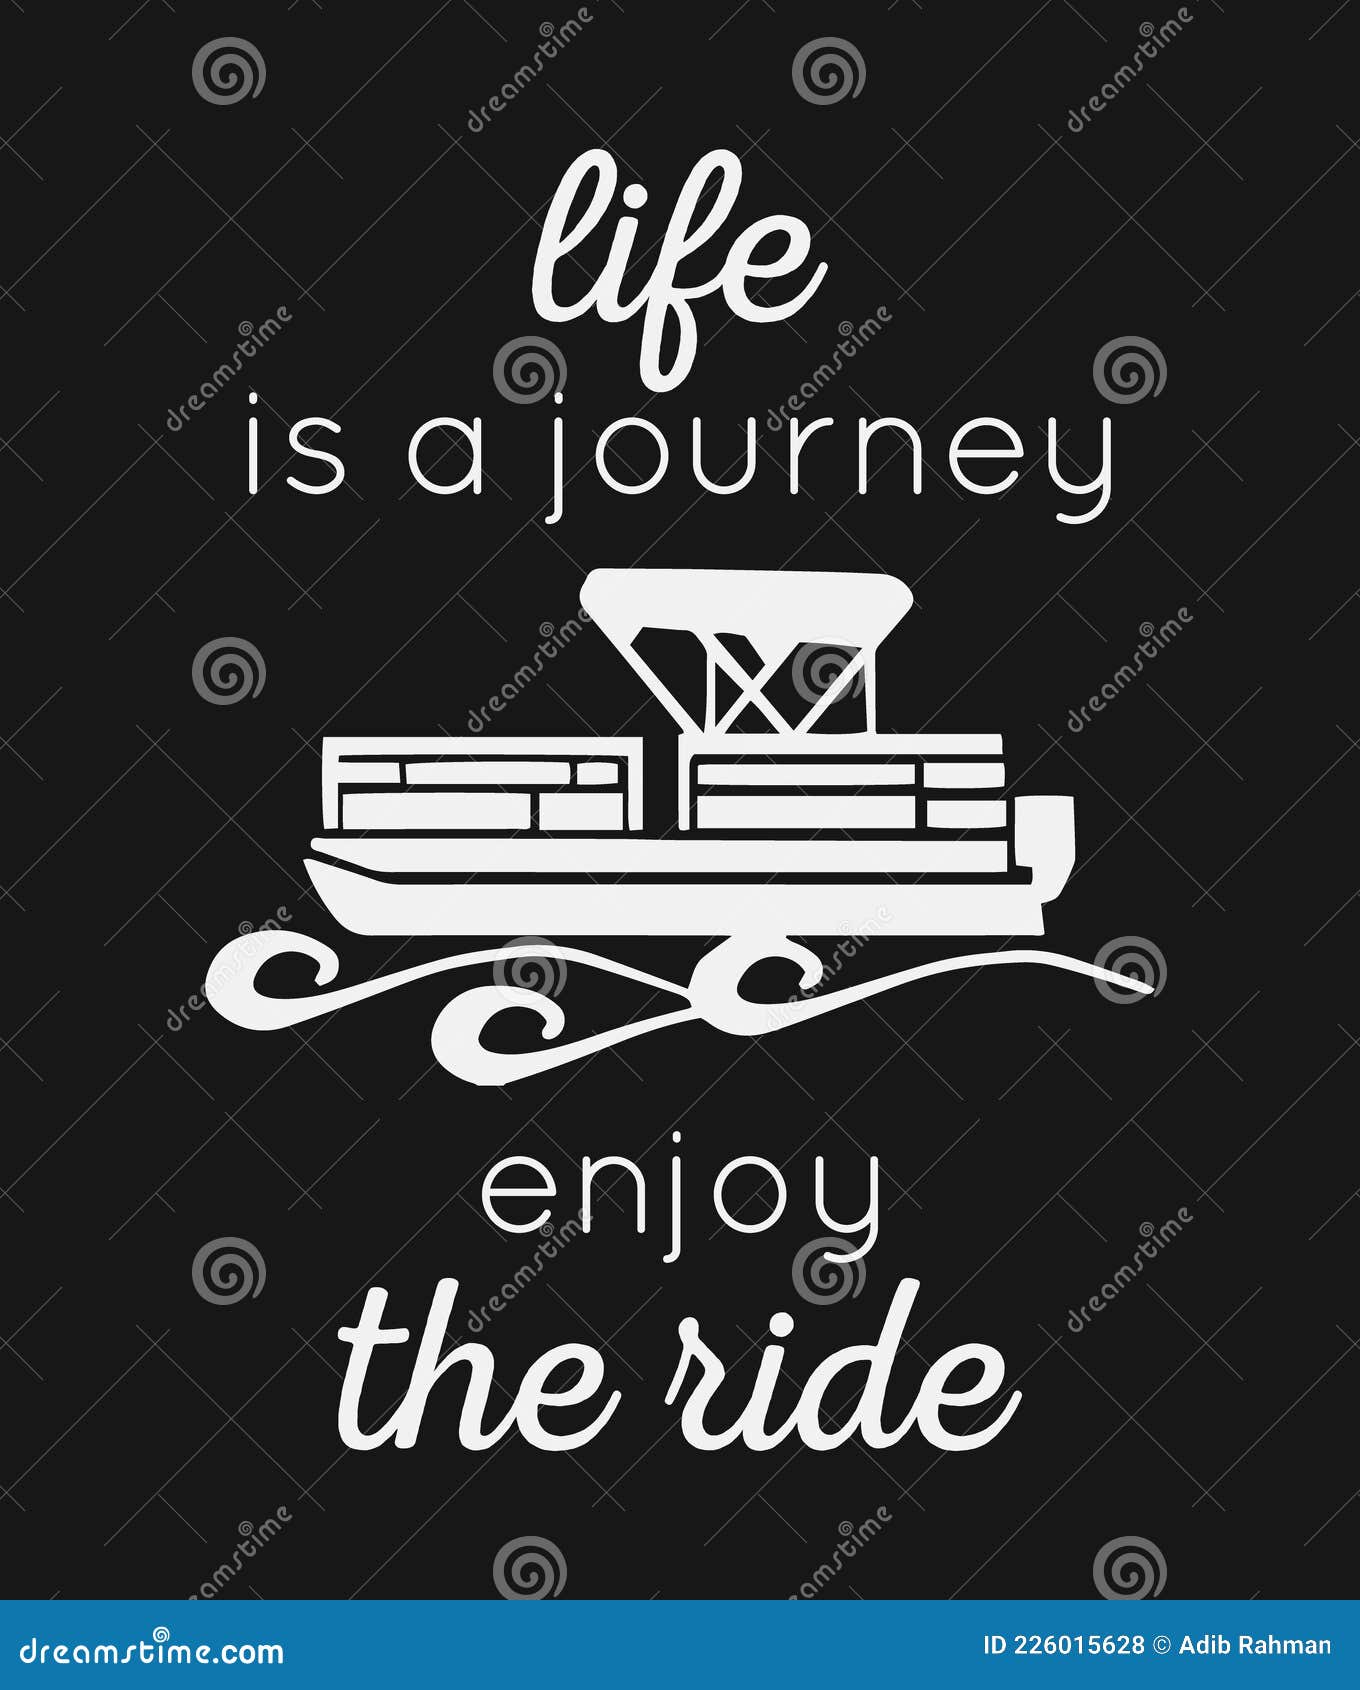 life is a journey enjoy the ride